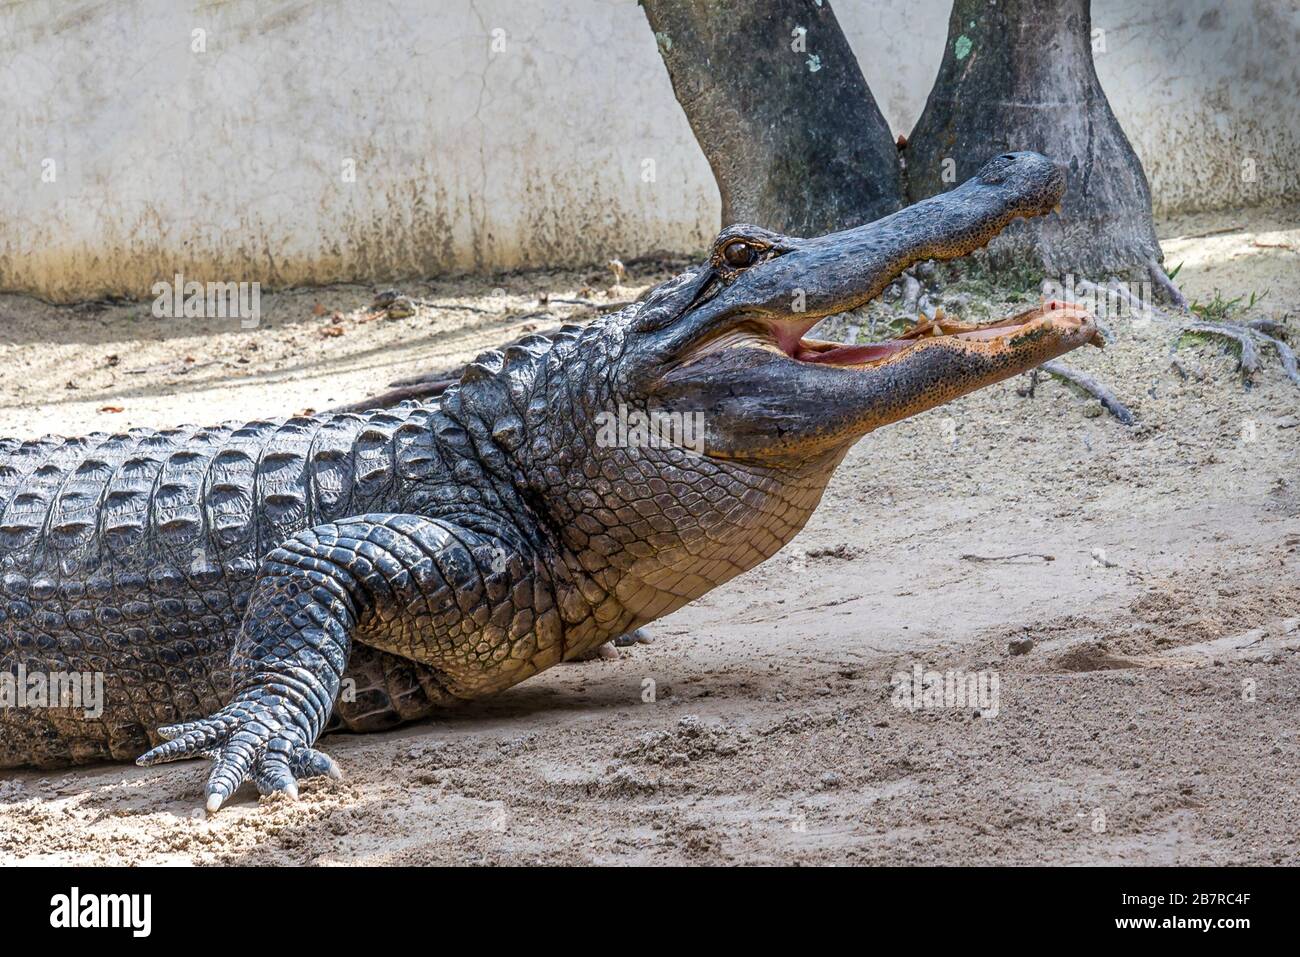 Closeup view of a alligator with mouth open Stock Photo